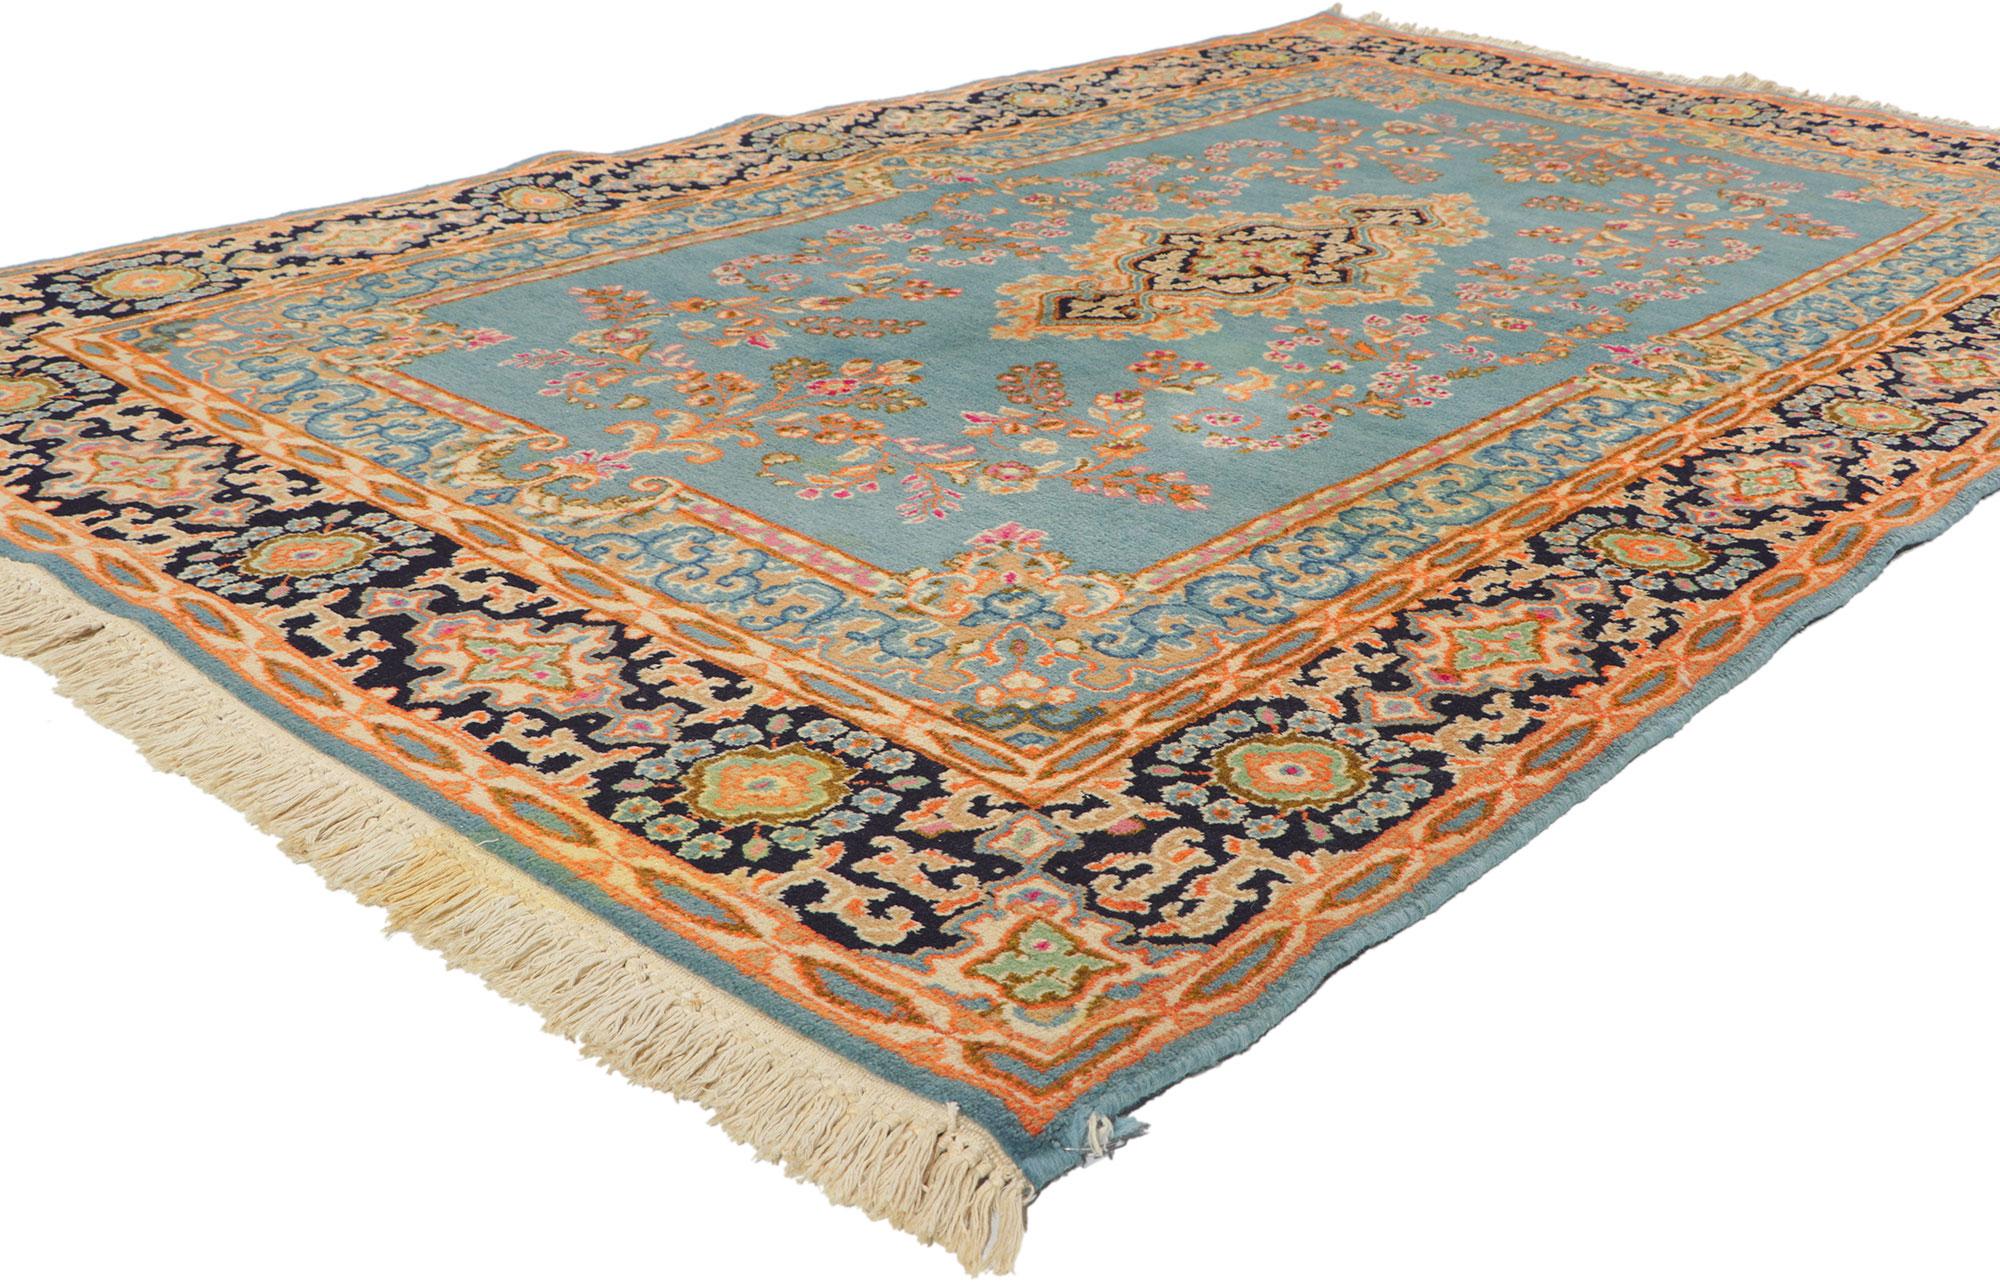 77514 vintage Persian Blue Kerman rug with Romantic English Country Charm. With a Classic floral pattern and traditional design aesthetic, this hand-knotted wool vintage Persian Kerman rug beautifully highlights romantic English Country Cottage